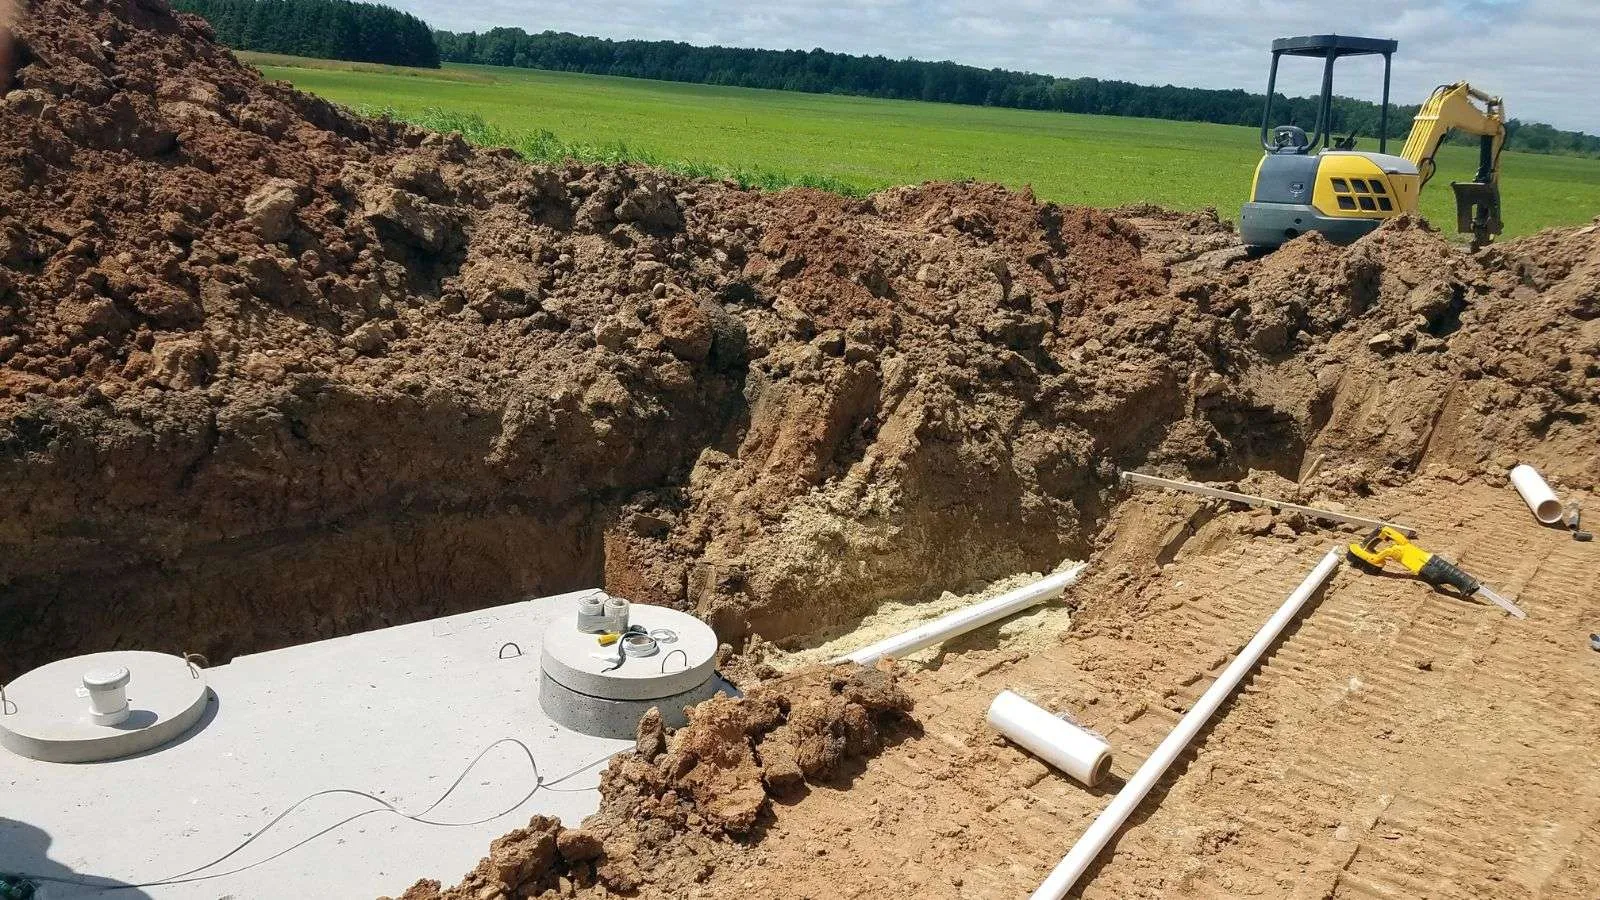 septic tanks for mobile homes - bighomeprojects.com